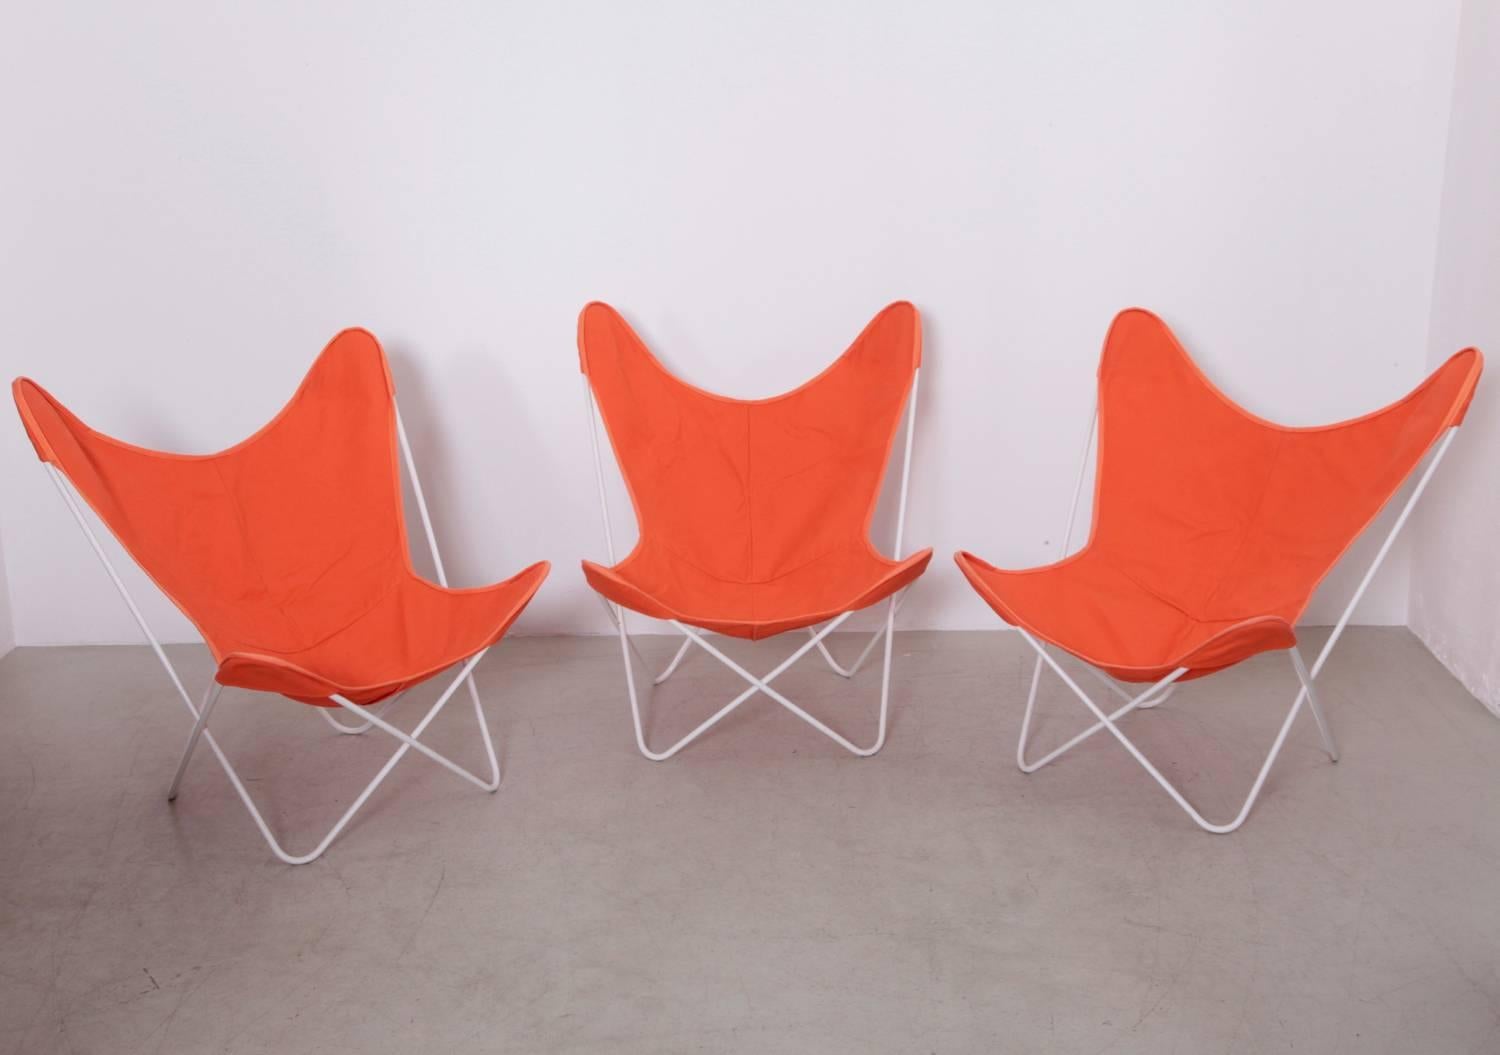 Old iron frames with orange cloth sling seat covers. Clean and room ready, circa 1958.